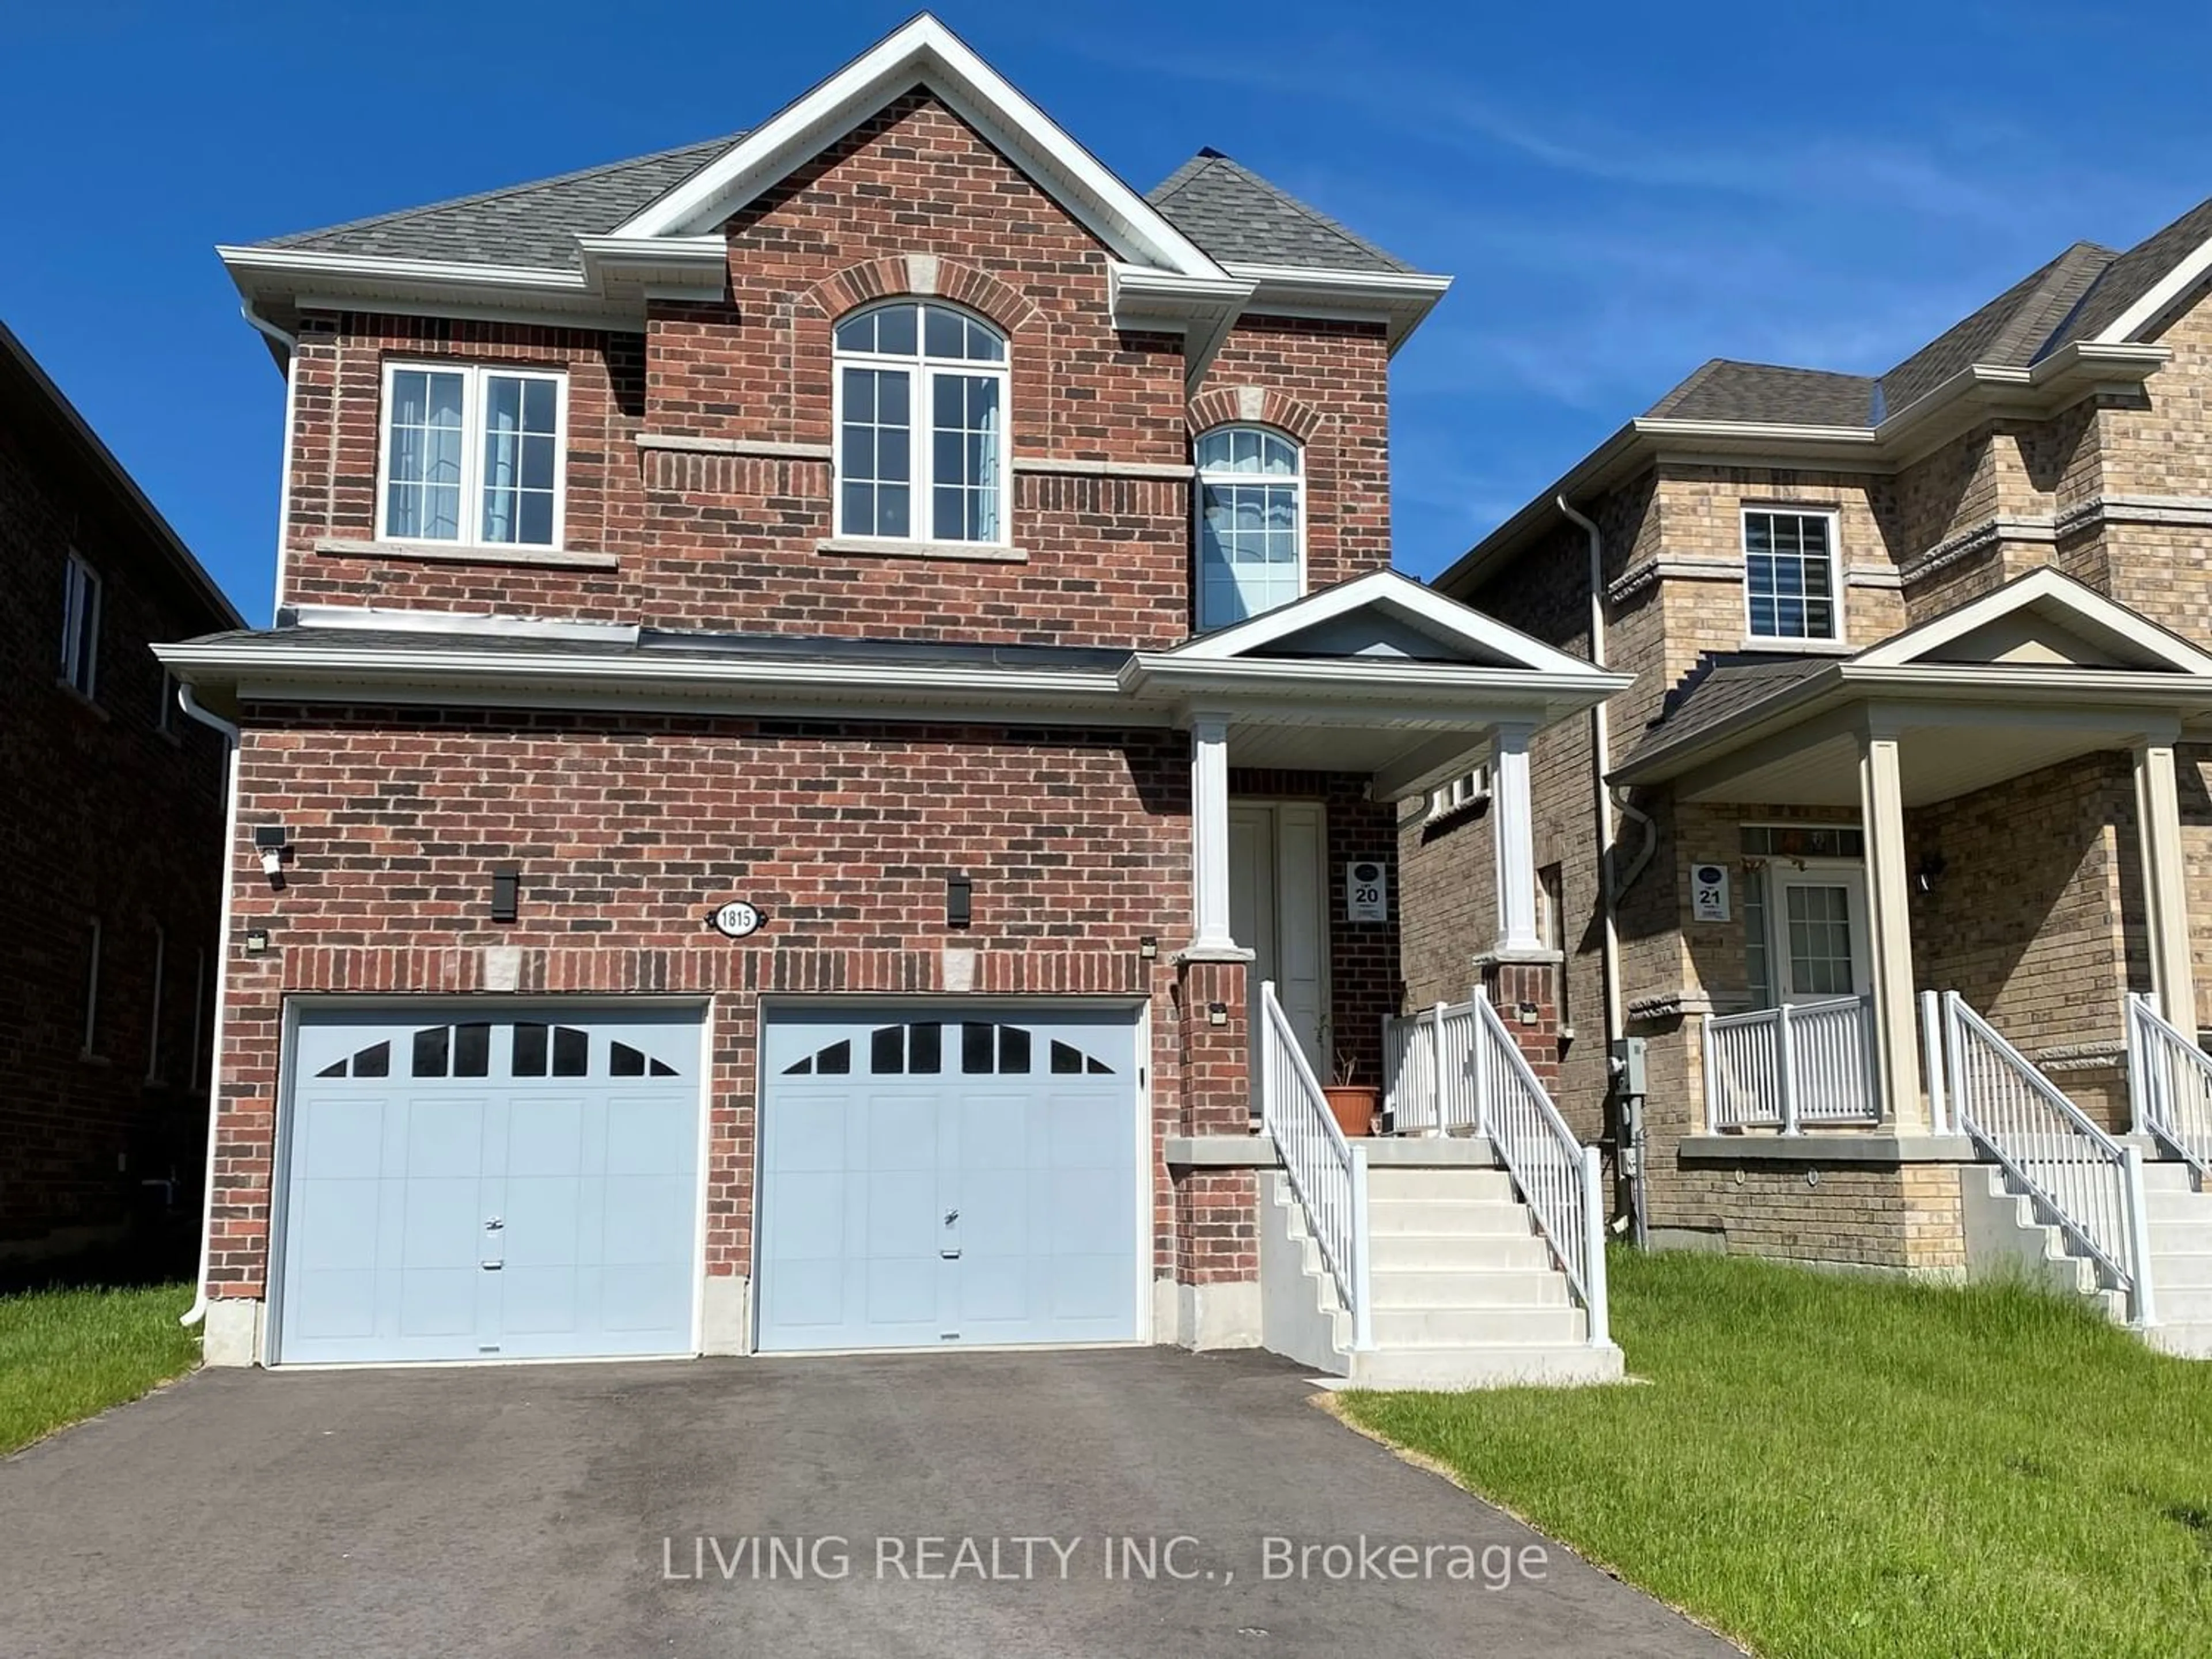 Home with brick exterior material for 1815 Fosterbrook St, Oshawa Ontario L1K 3G5